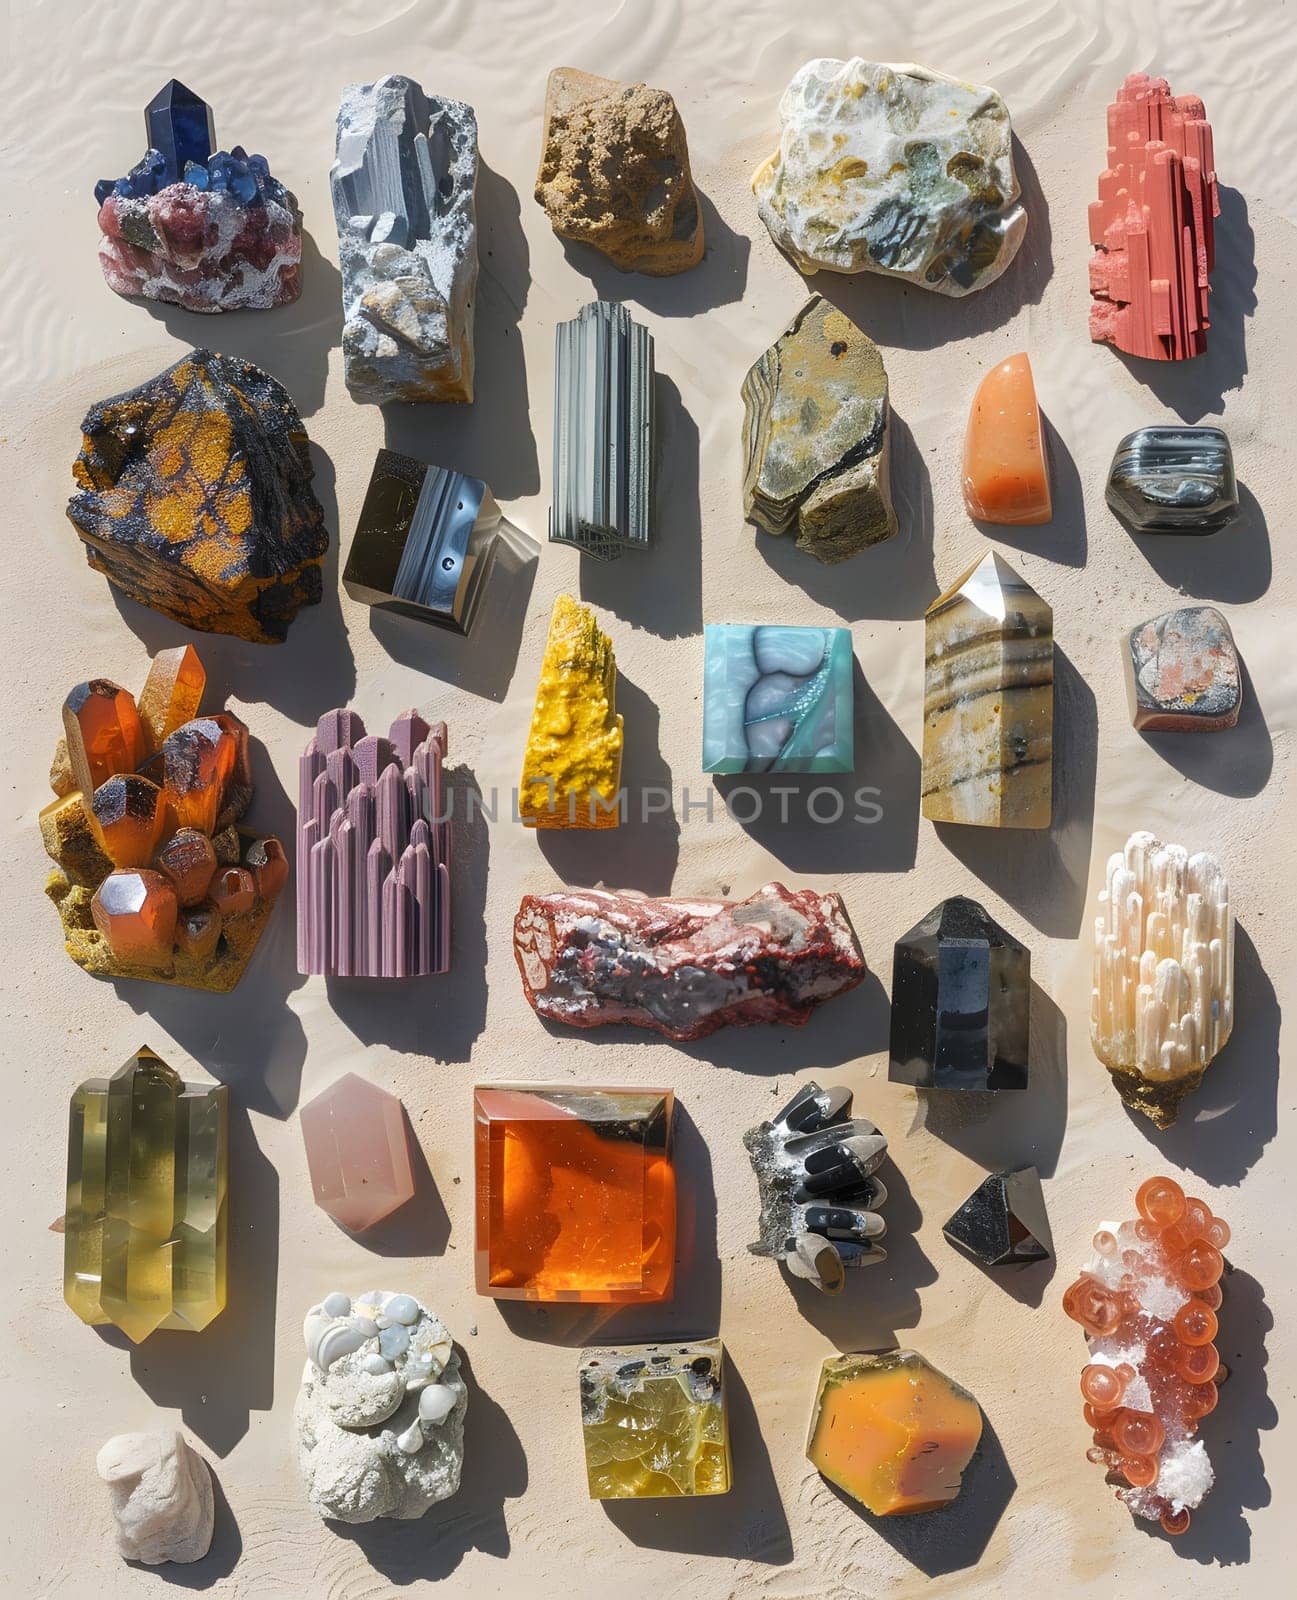 A photograph showcasing various types of rocks and crystals displayed on a table, serving as inspiration for art and fashion accessories